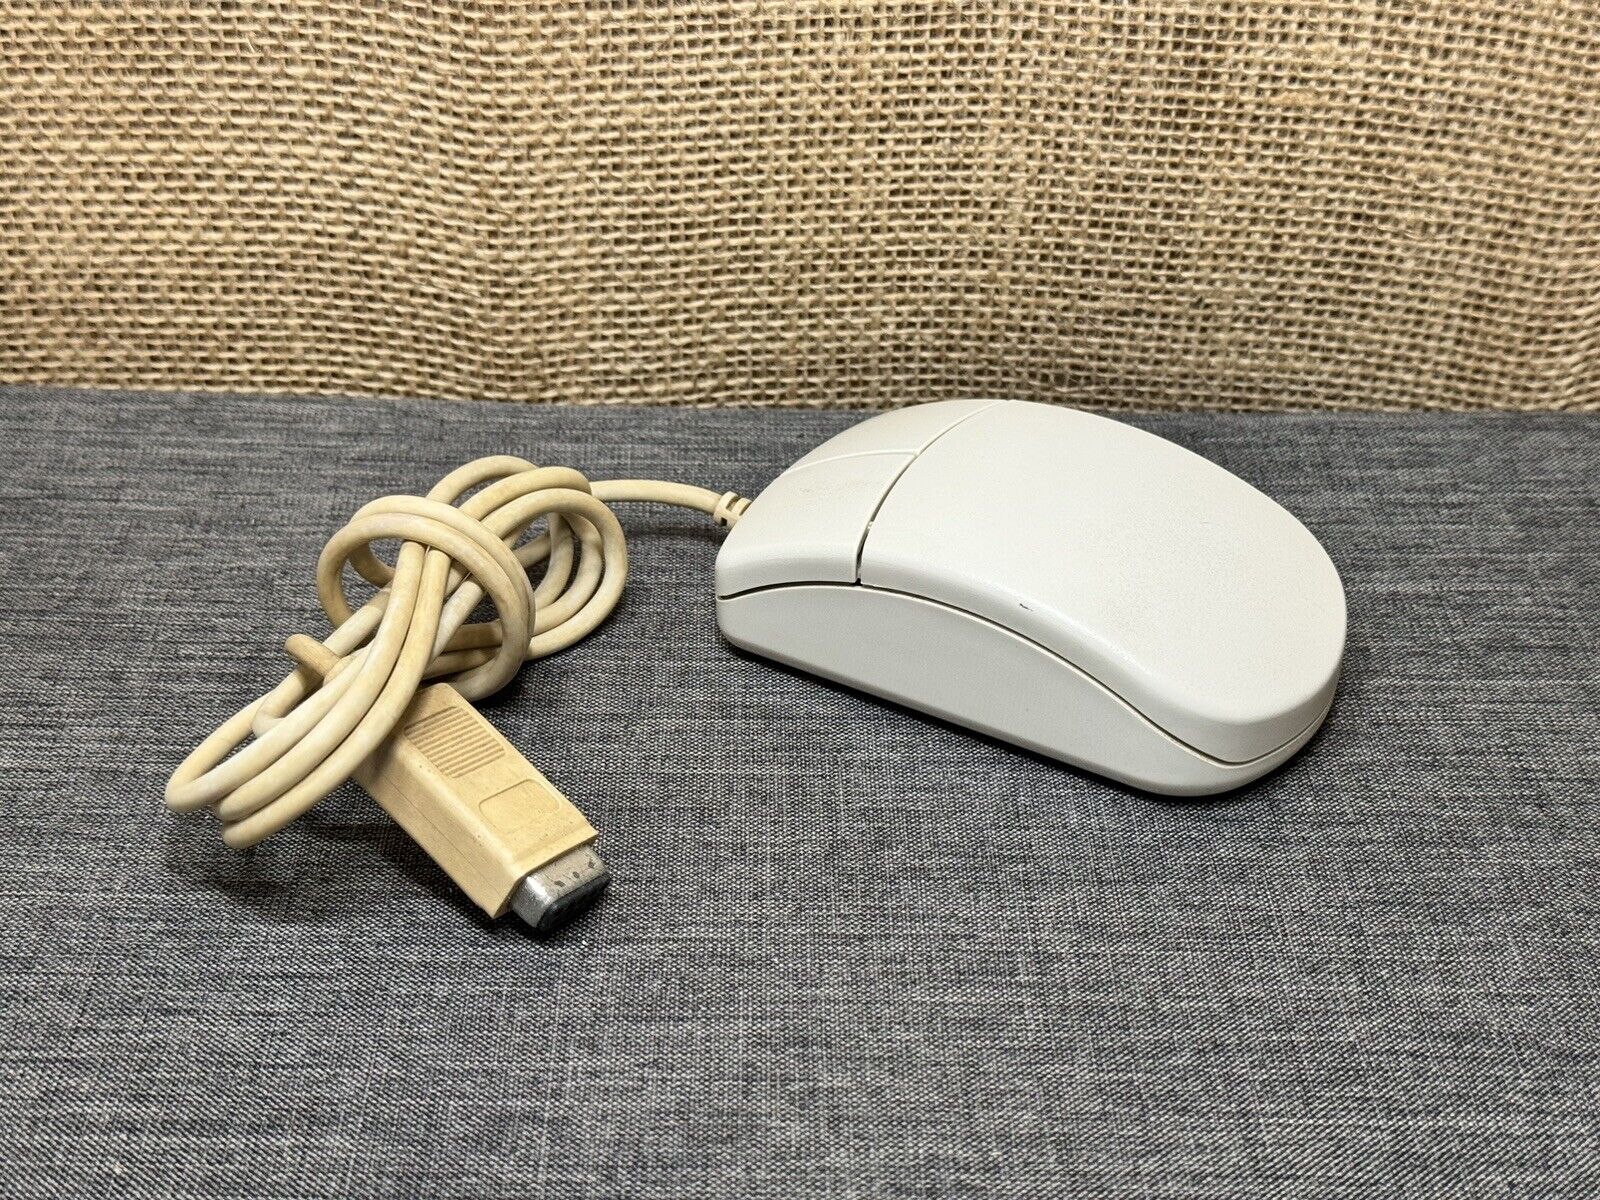 Commodore Amiga 600 OEM Mouse.   Used and Untested.